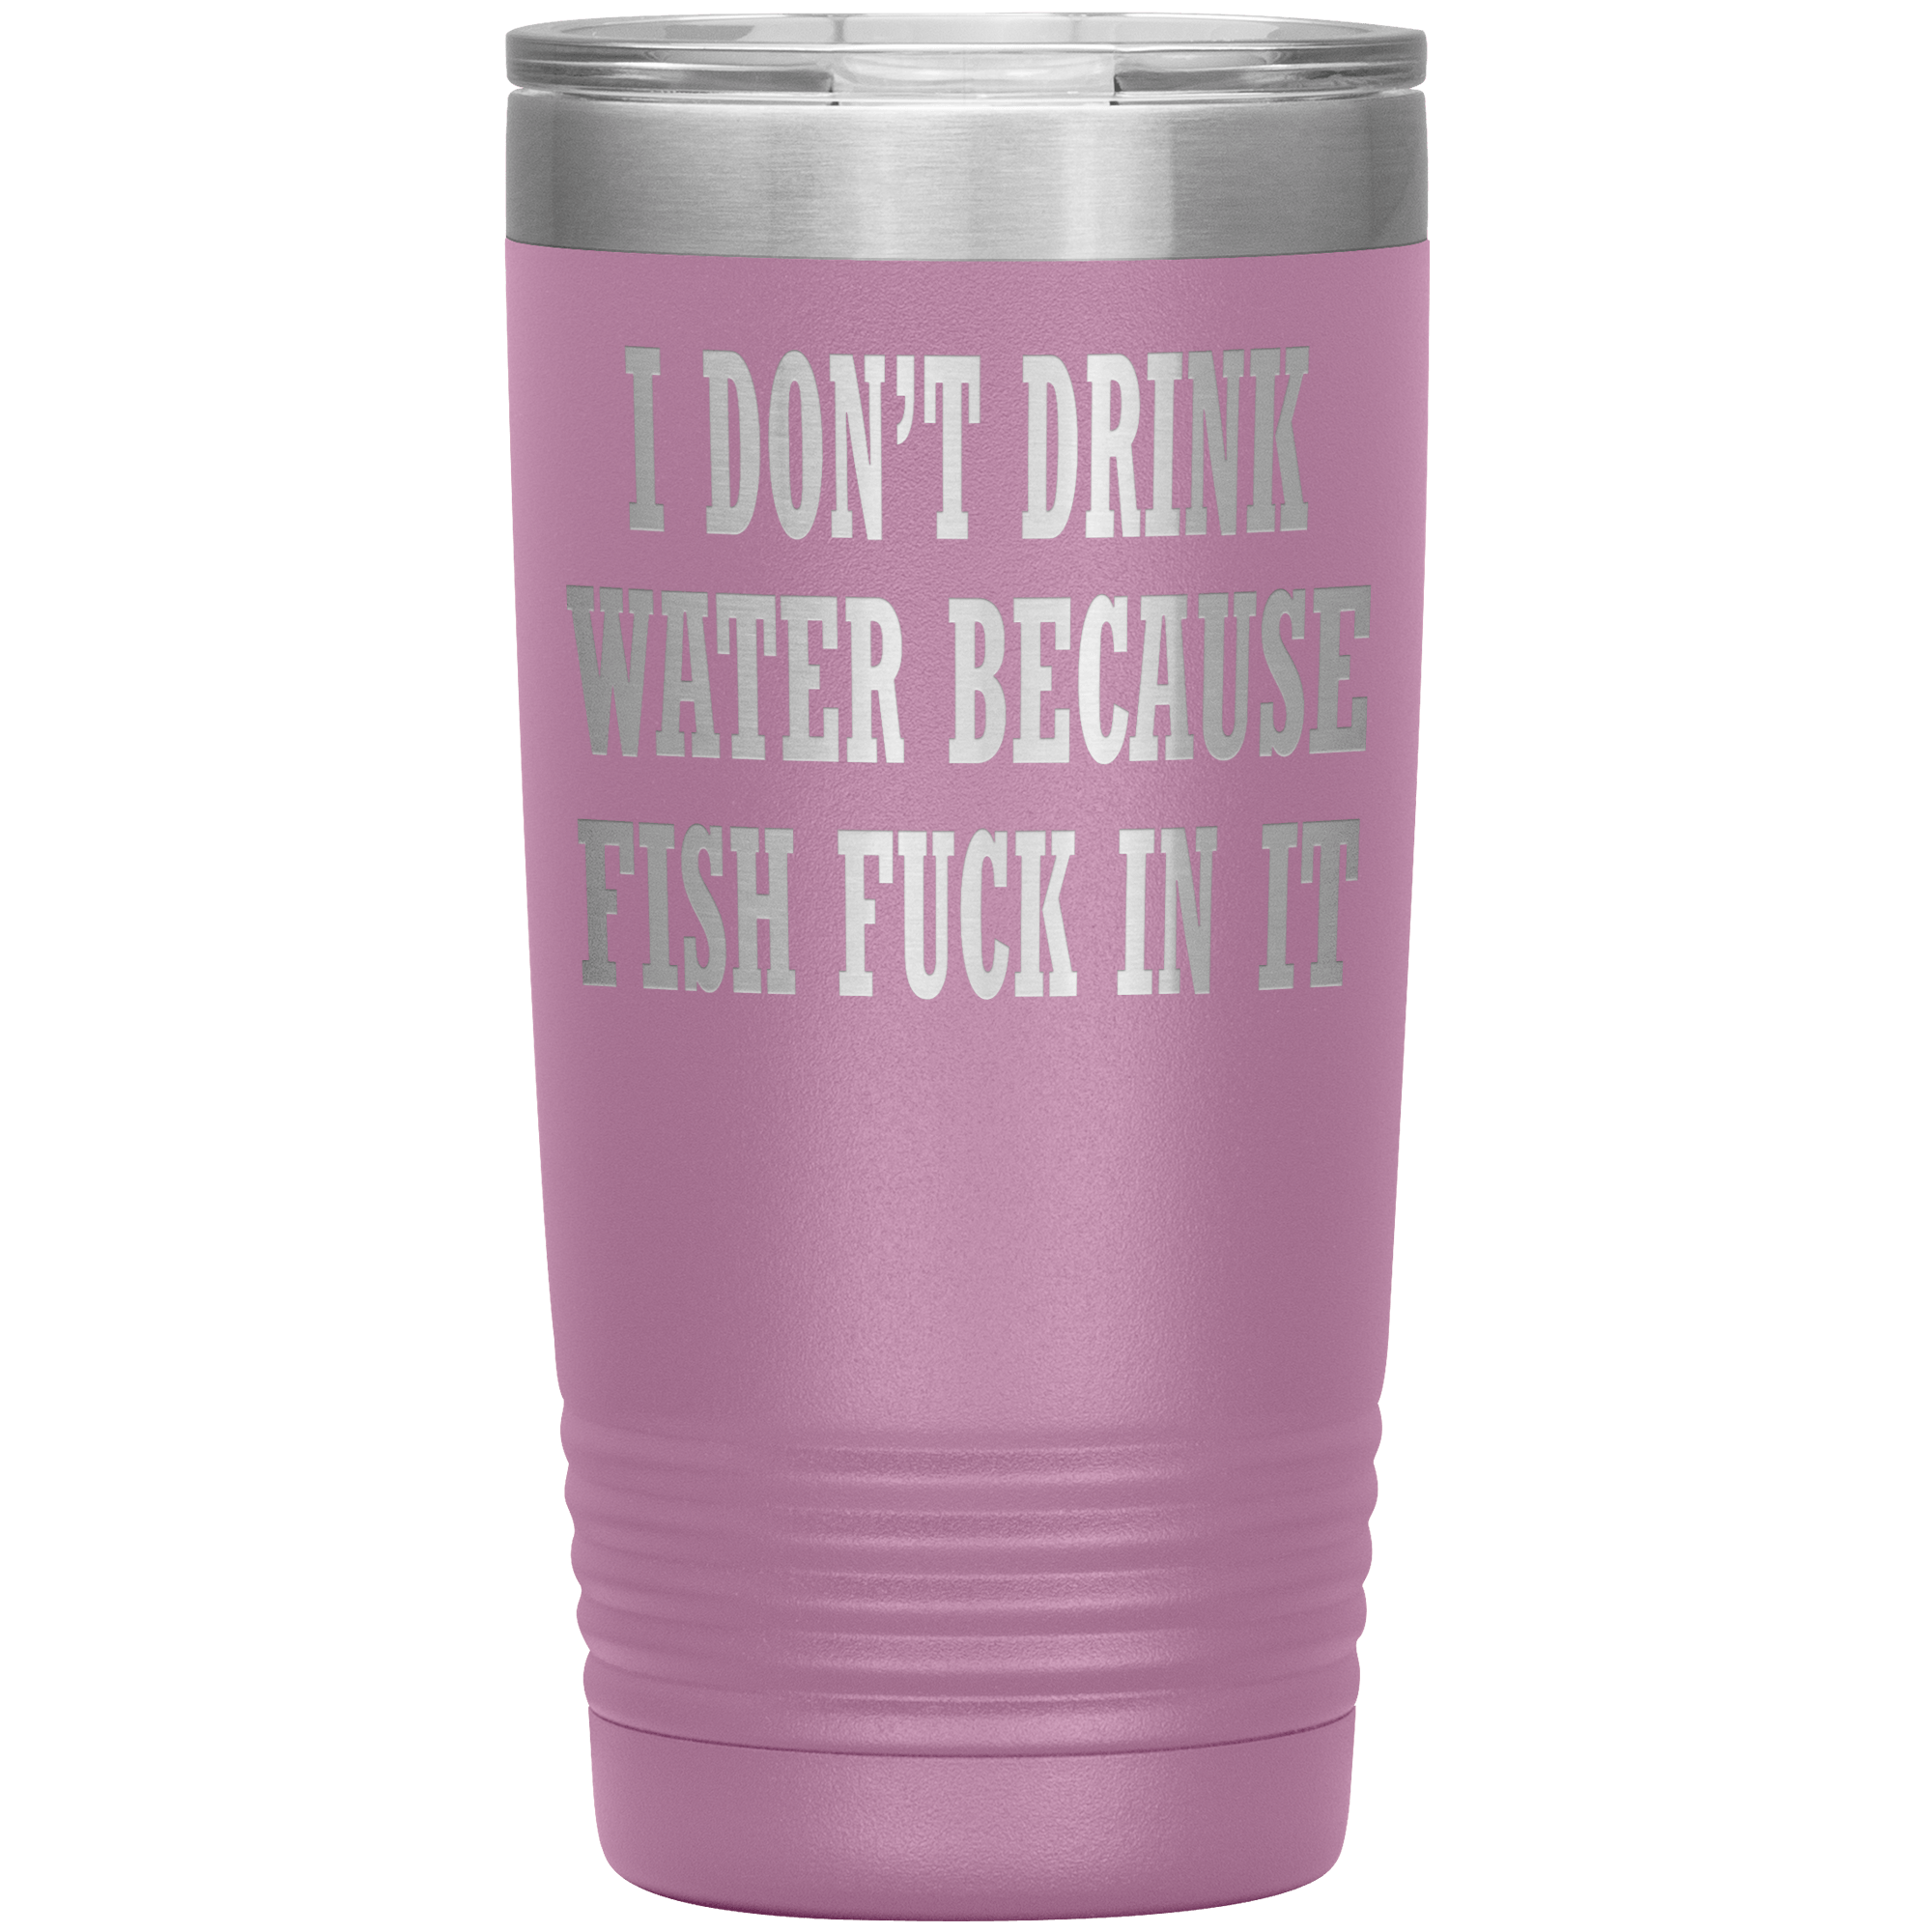 " I DON'T DRINK WATER BECAUSE FISH FUCK IN IT " TUMBLER